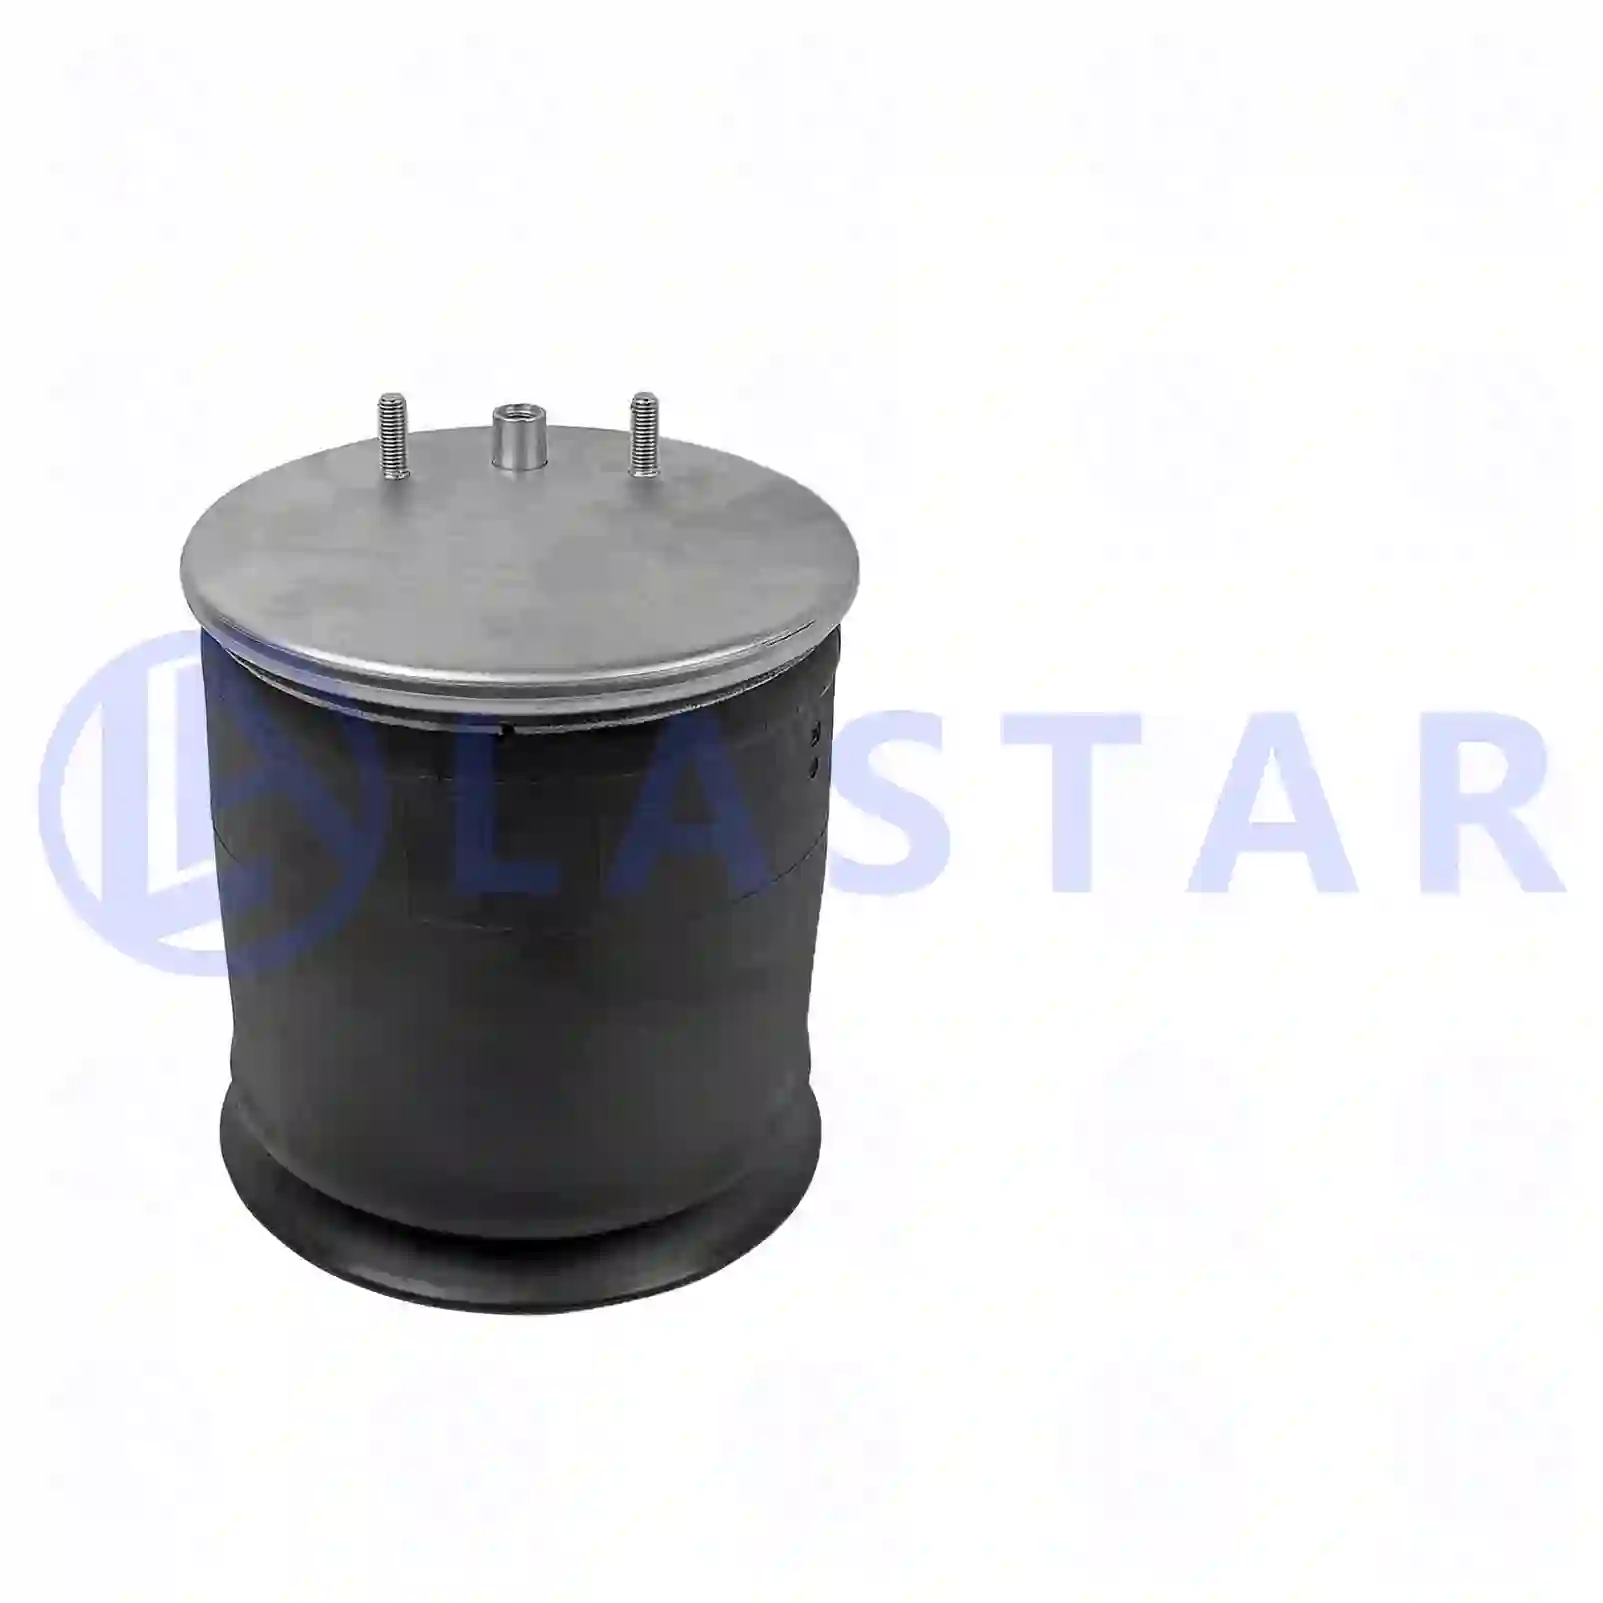 Air spring, with plastic piston, 77728927, 5010630800, 20722409, 22025612, ZG40725-0008, , ||  77728927 Lastar Spare Part | Truck Spare Parts, Auotomotive Spare Parts Air spring, with plastic piston, 77728927, 5010630800, 20722409, 22025612, ZG40725-0008, , ||  77728927 Lastar Spare Part | Truck Spare Parts, Auotomotive Spare Parts